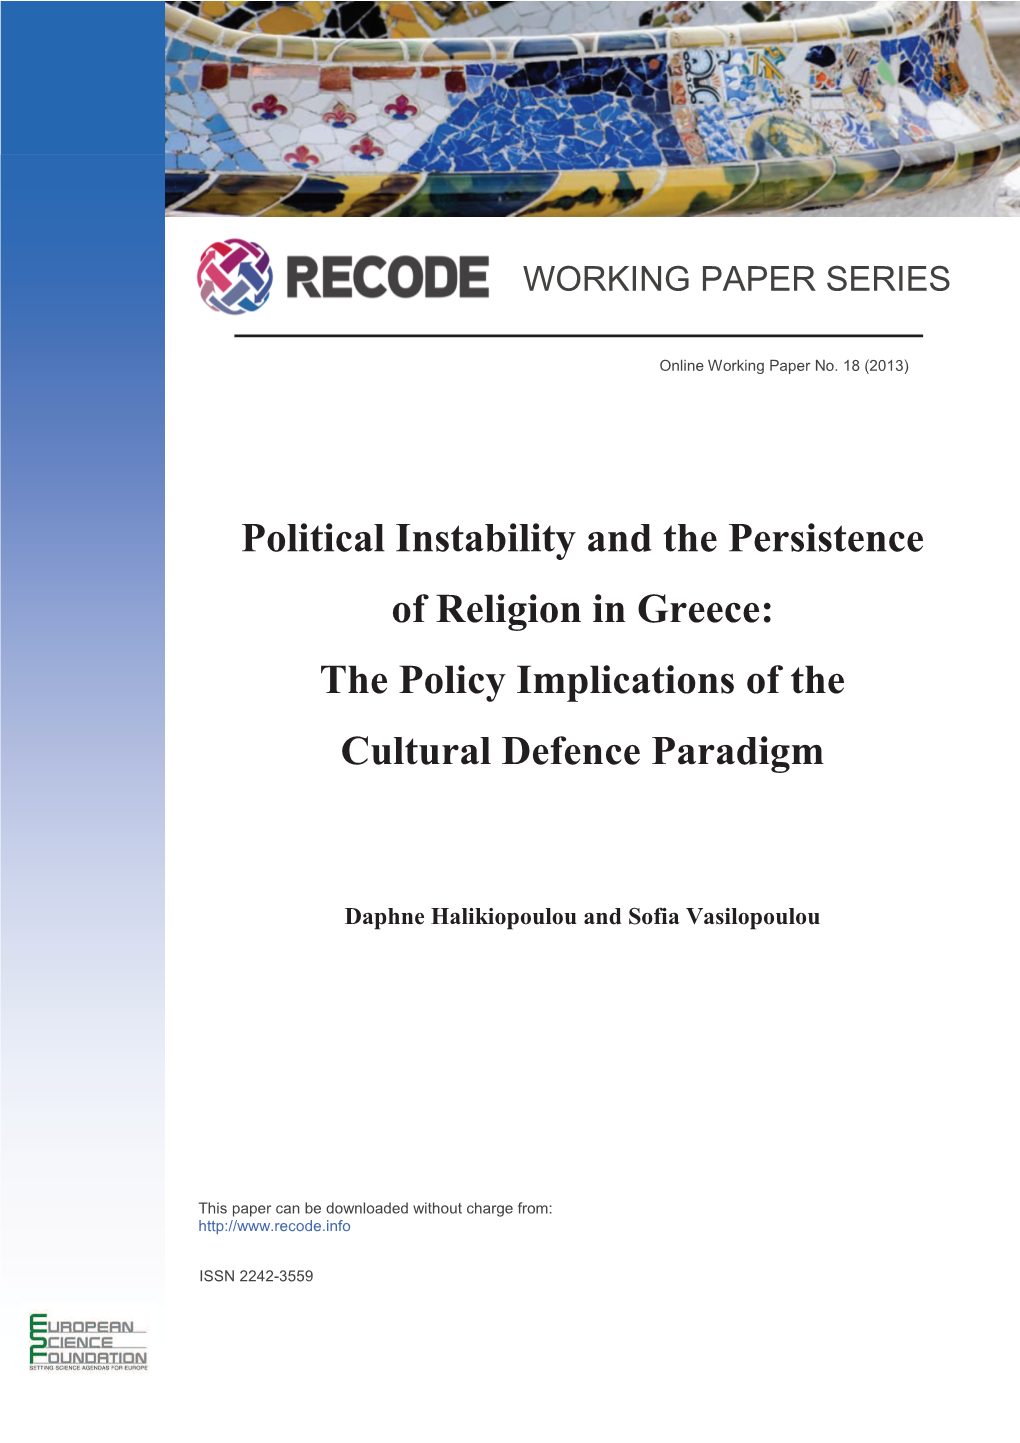 Political Instability and the Persistence of Religion in Greece: the Policy Implications of the Cultural Defence Paradigm